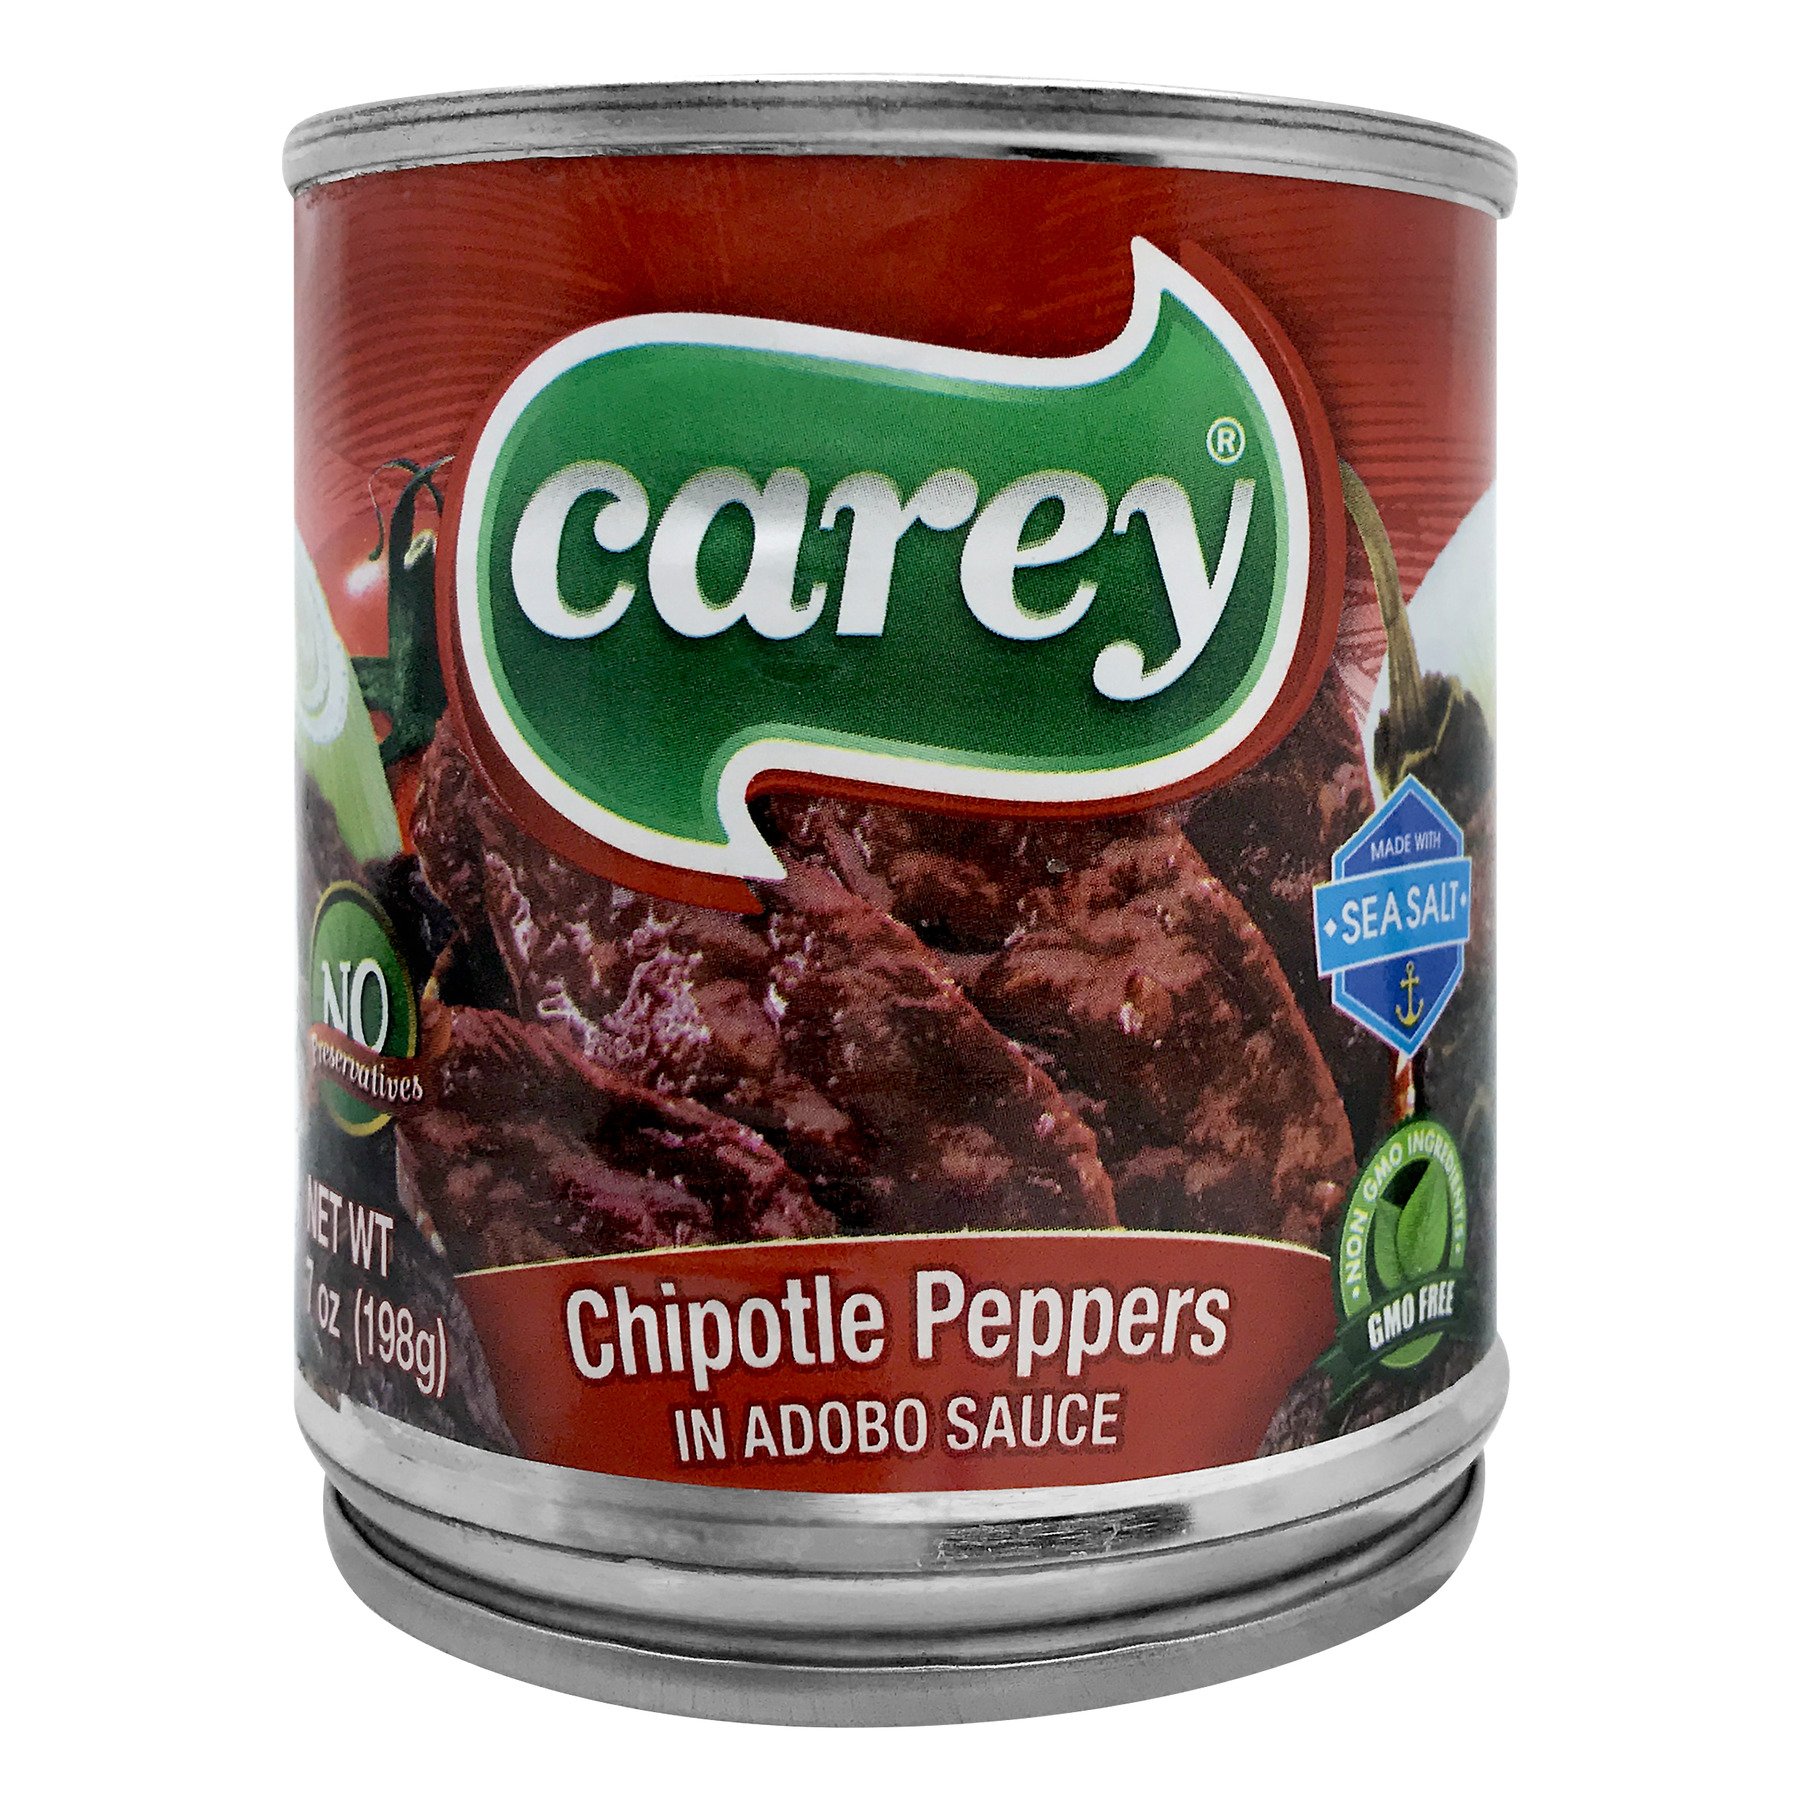 Carey Chipotle Peppers In Adobo Sauce, 7.0 OZ